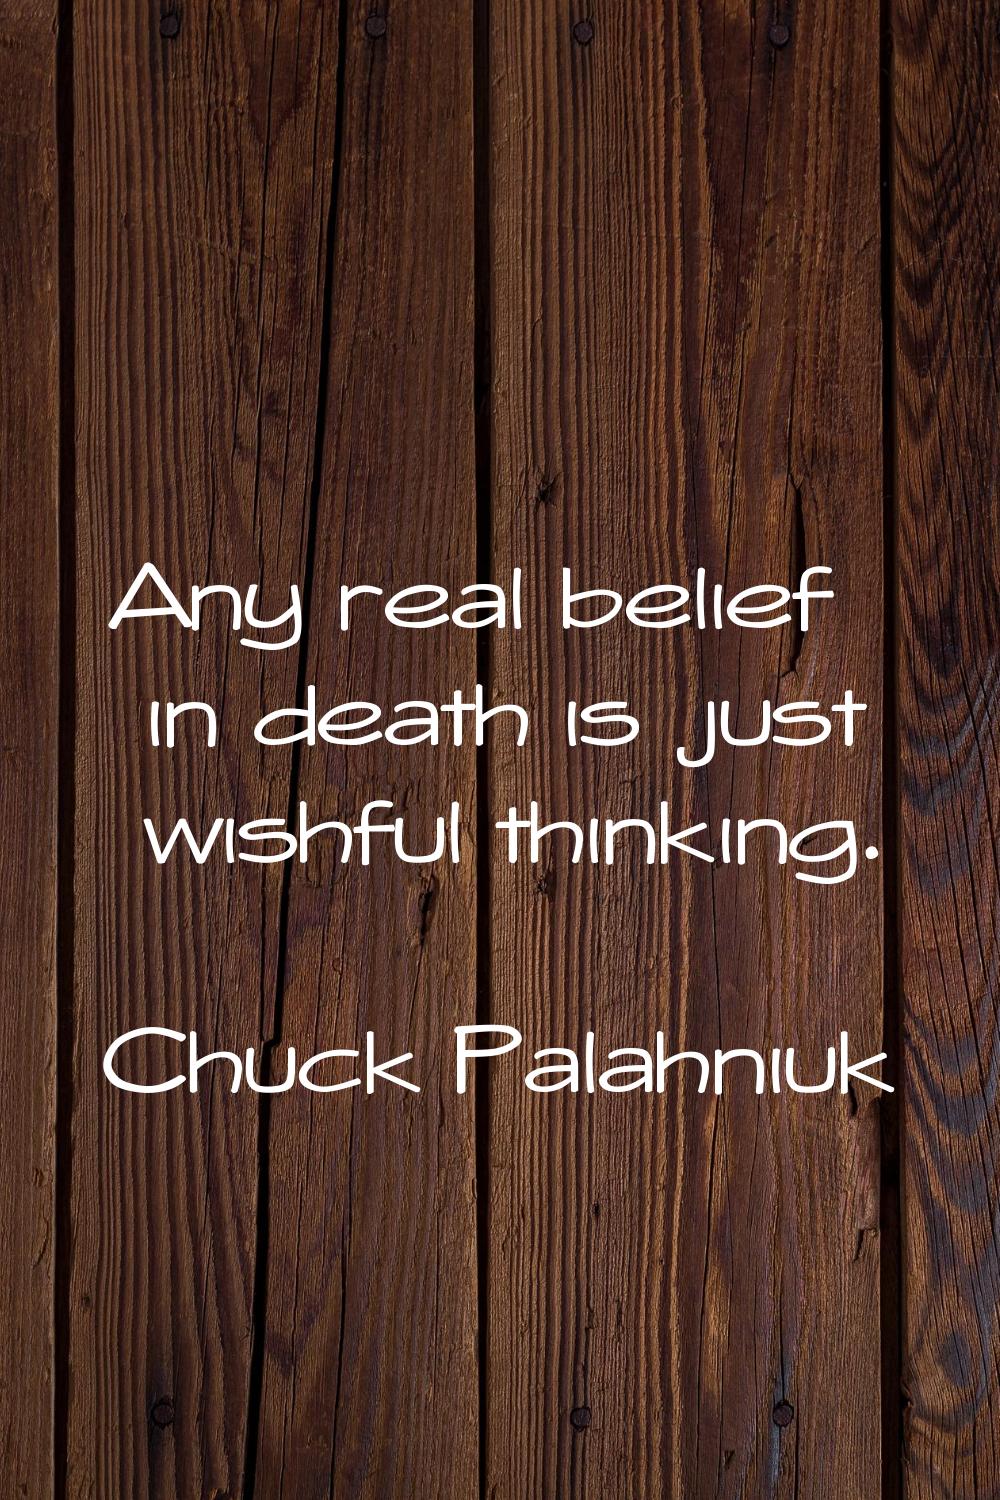 Any real belief in death is just wishful thinking.